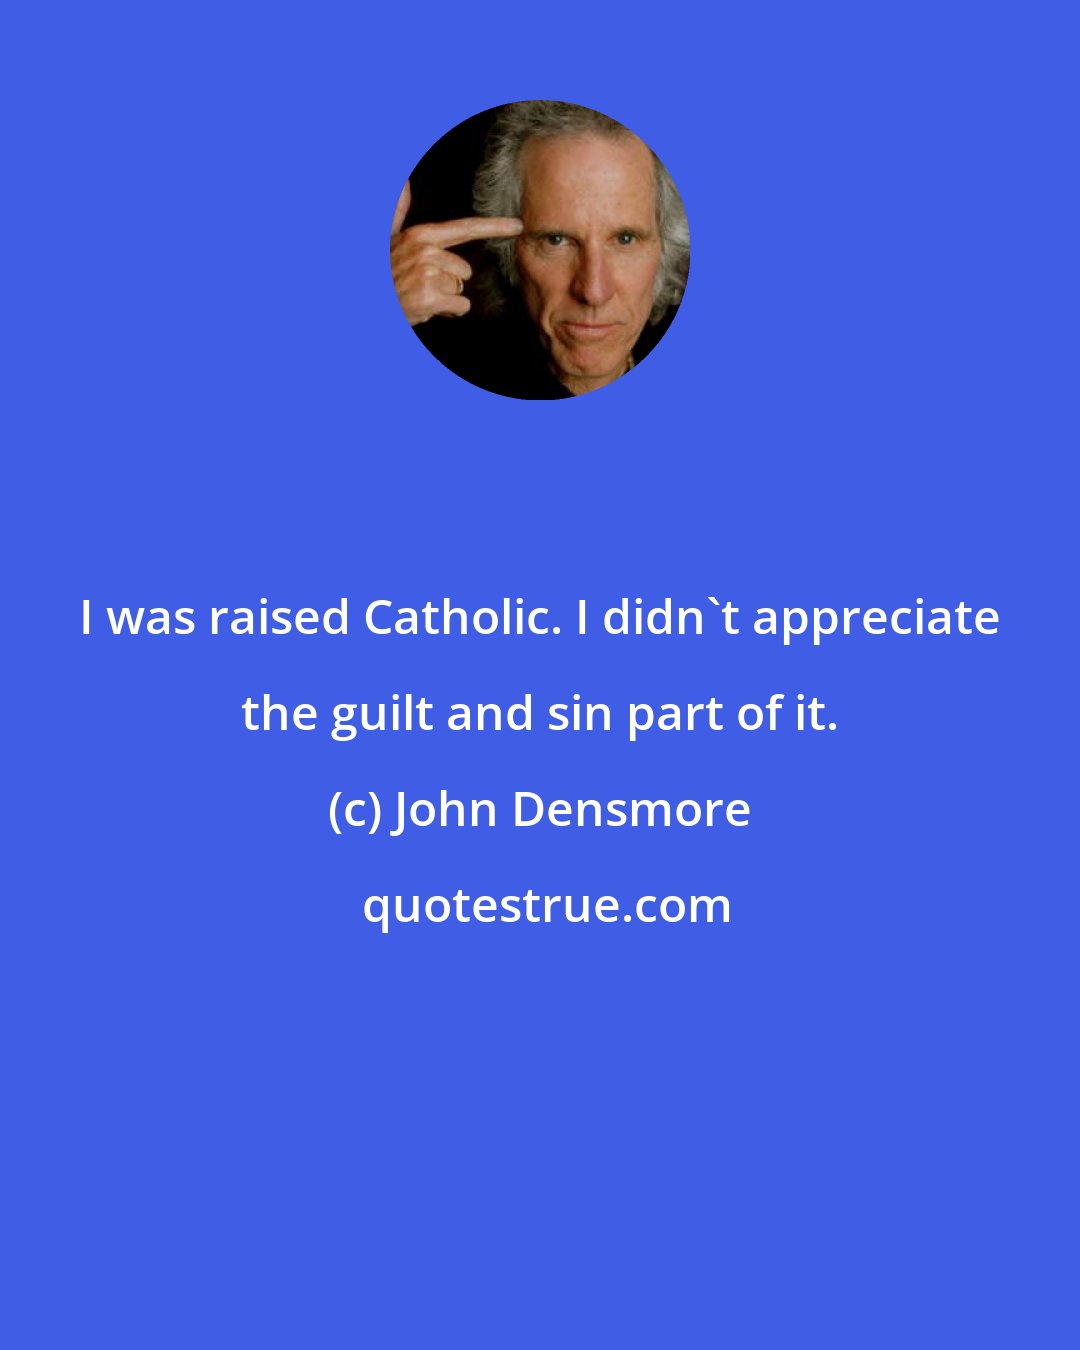 John Densmore: I was raised Catholic. I didn't appreciate the guilt and sin part of it.